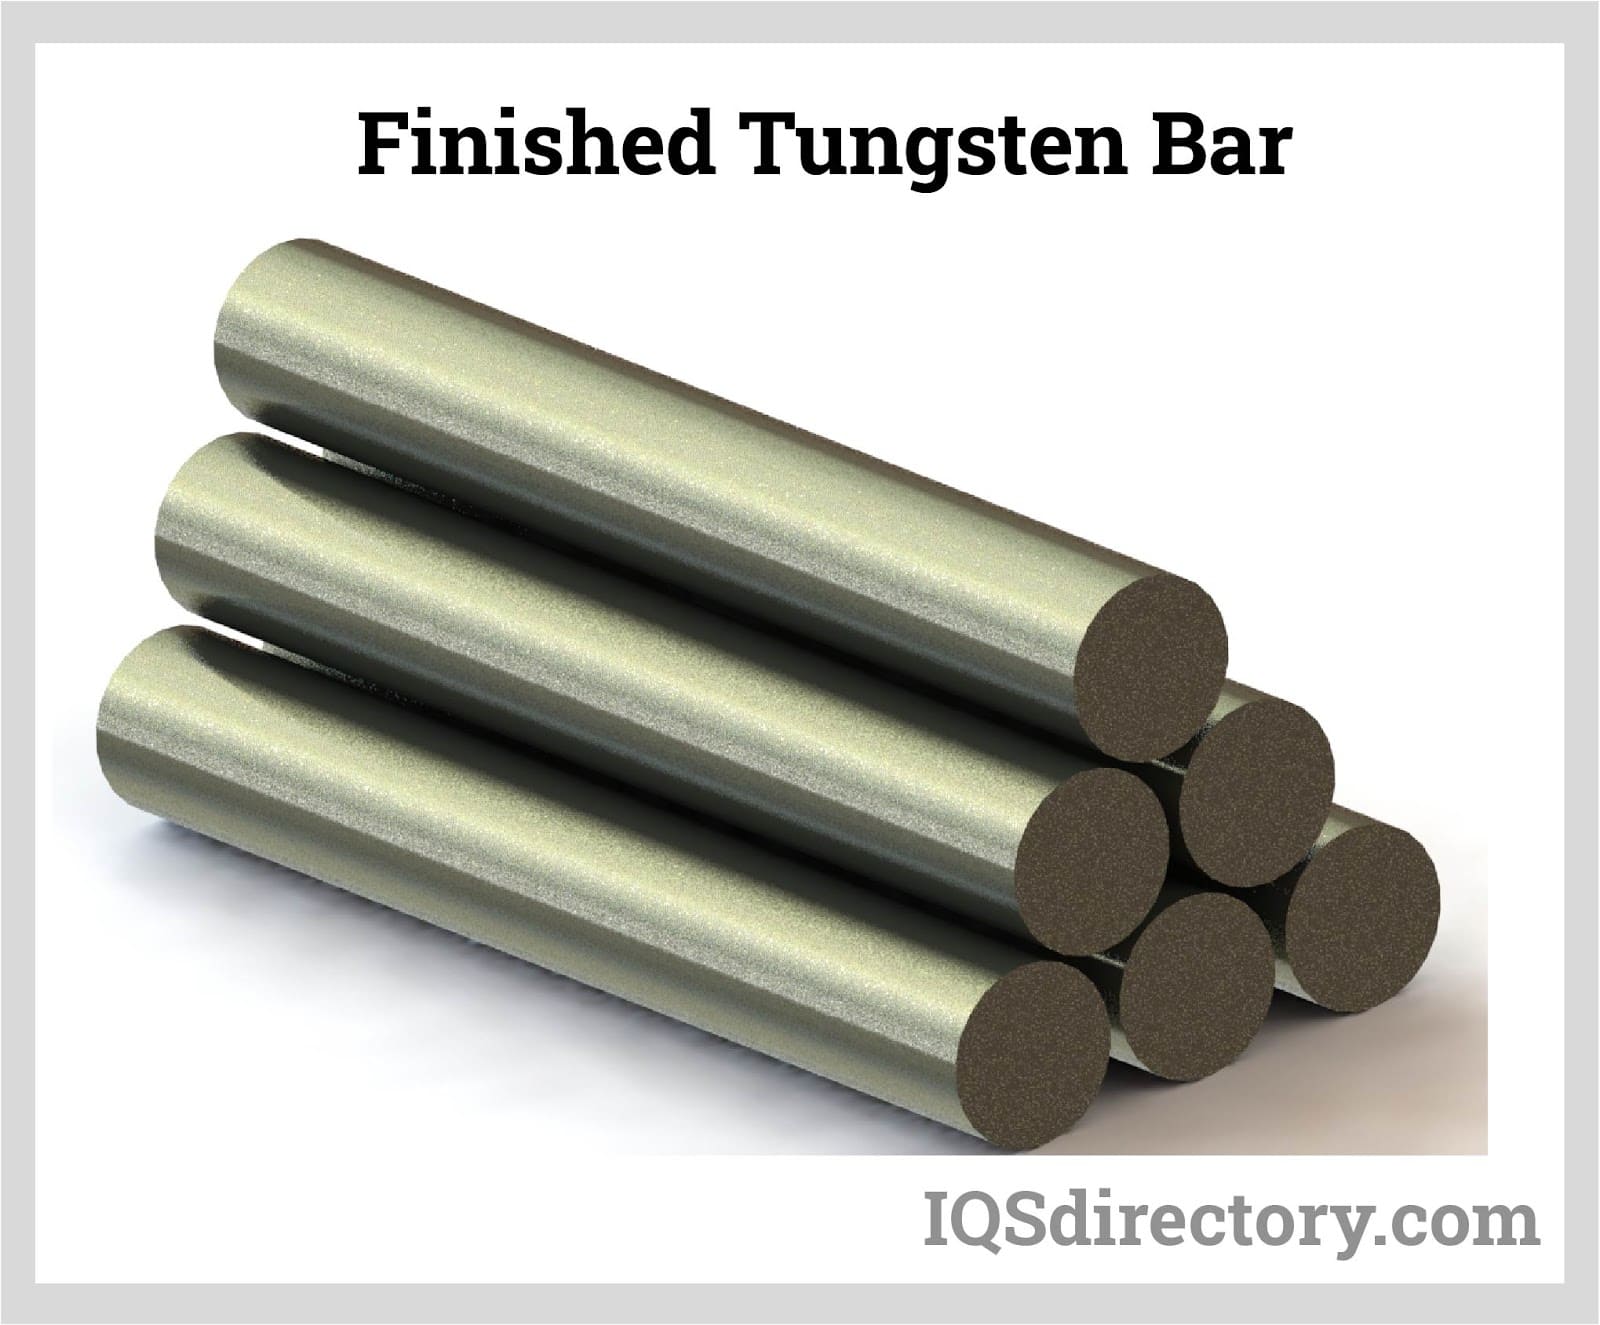 Mountaineer Forfatter resterende Tungsten Metal: Types, Applications, Advantages, and Properties